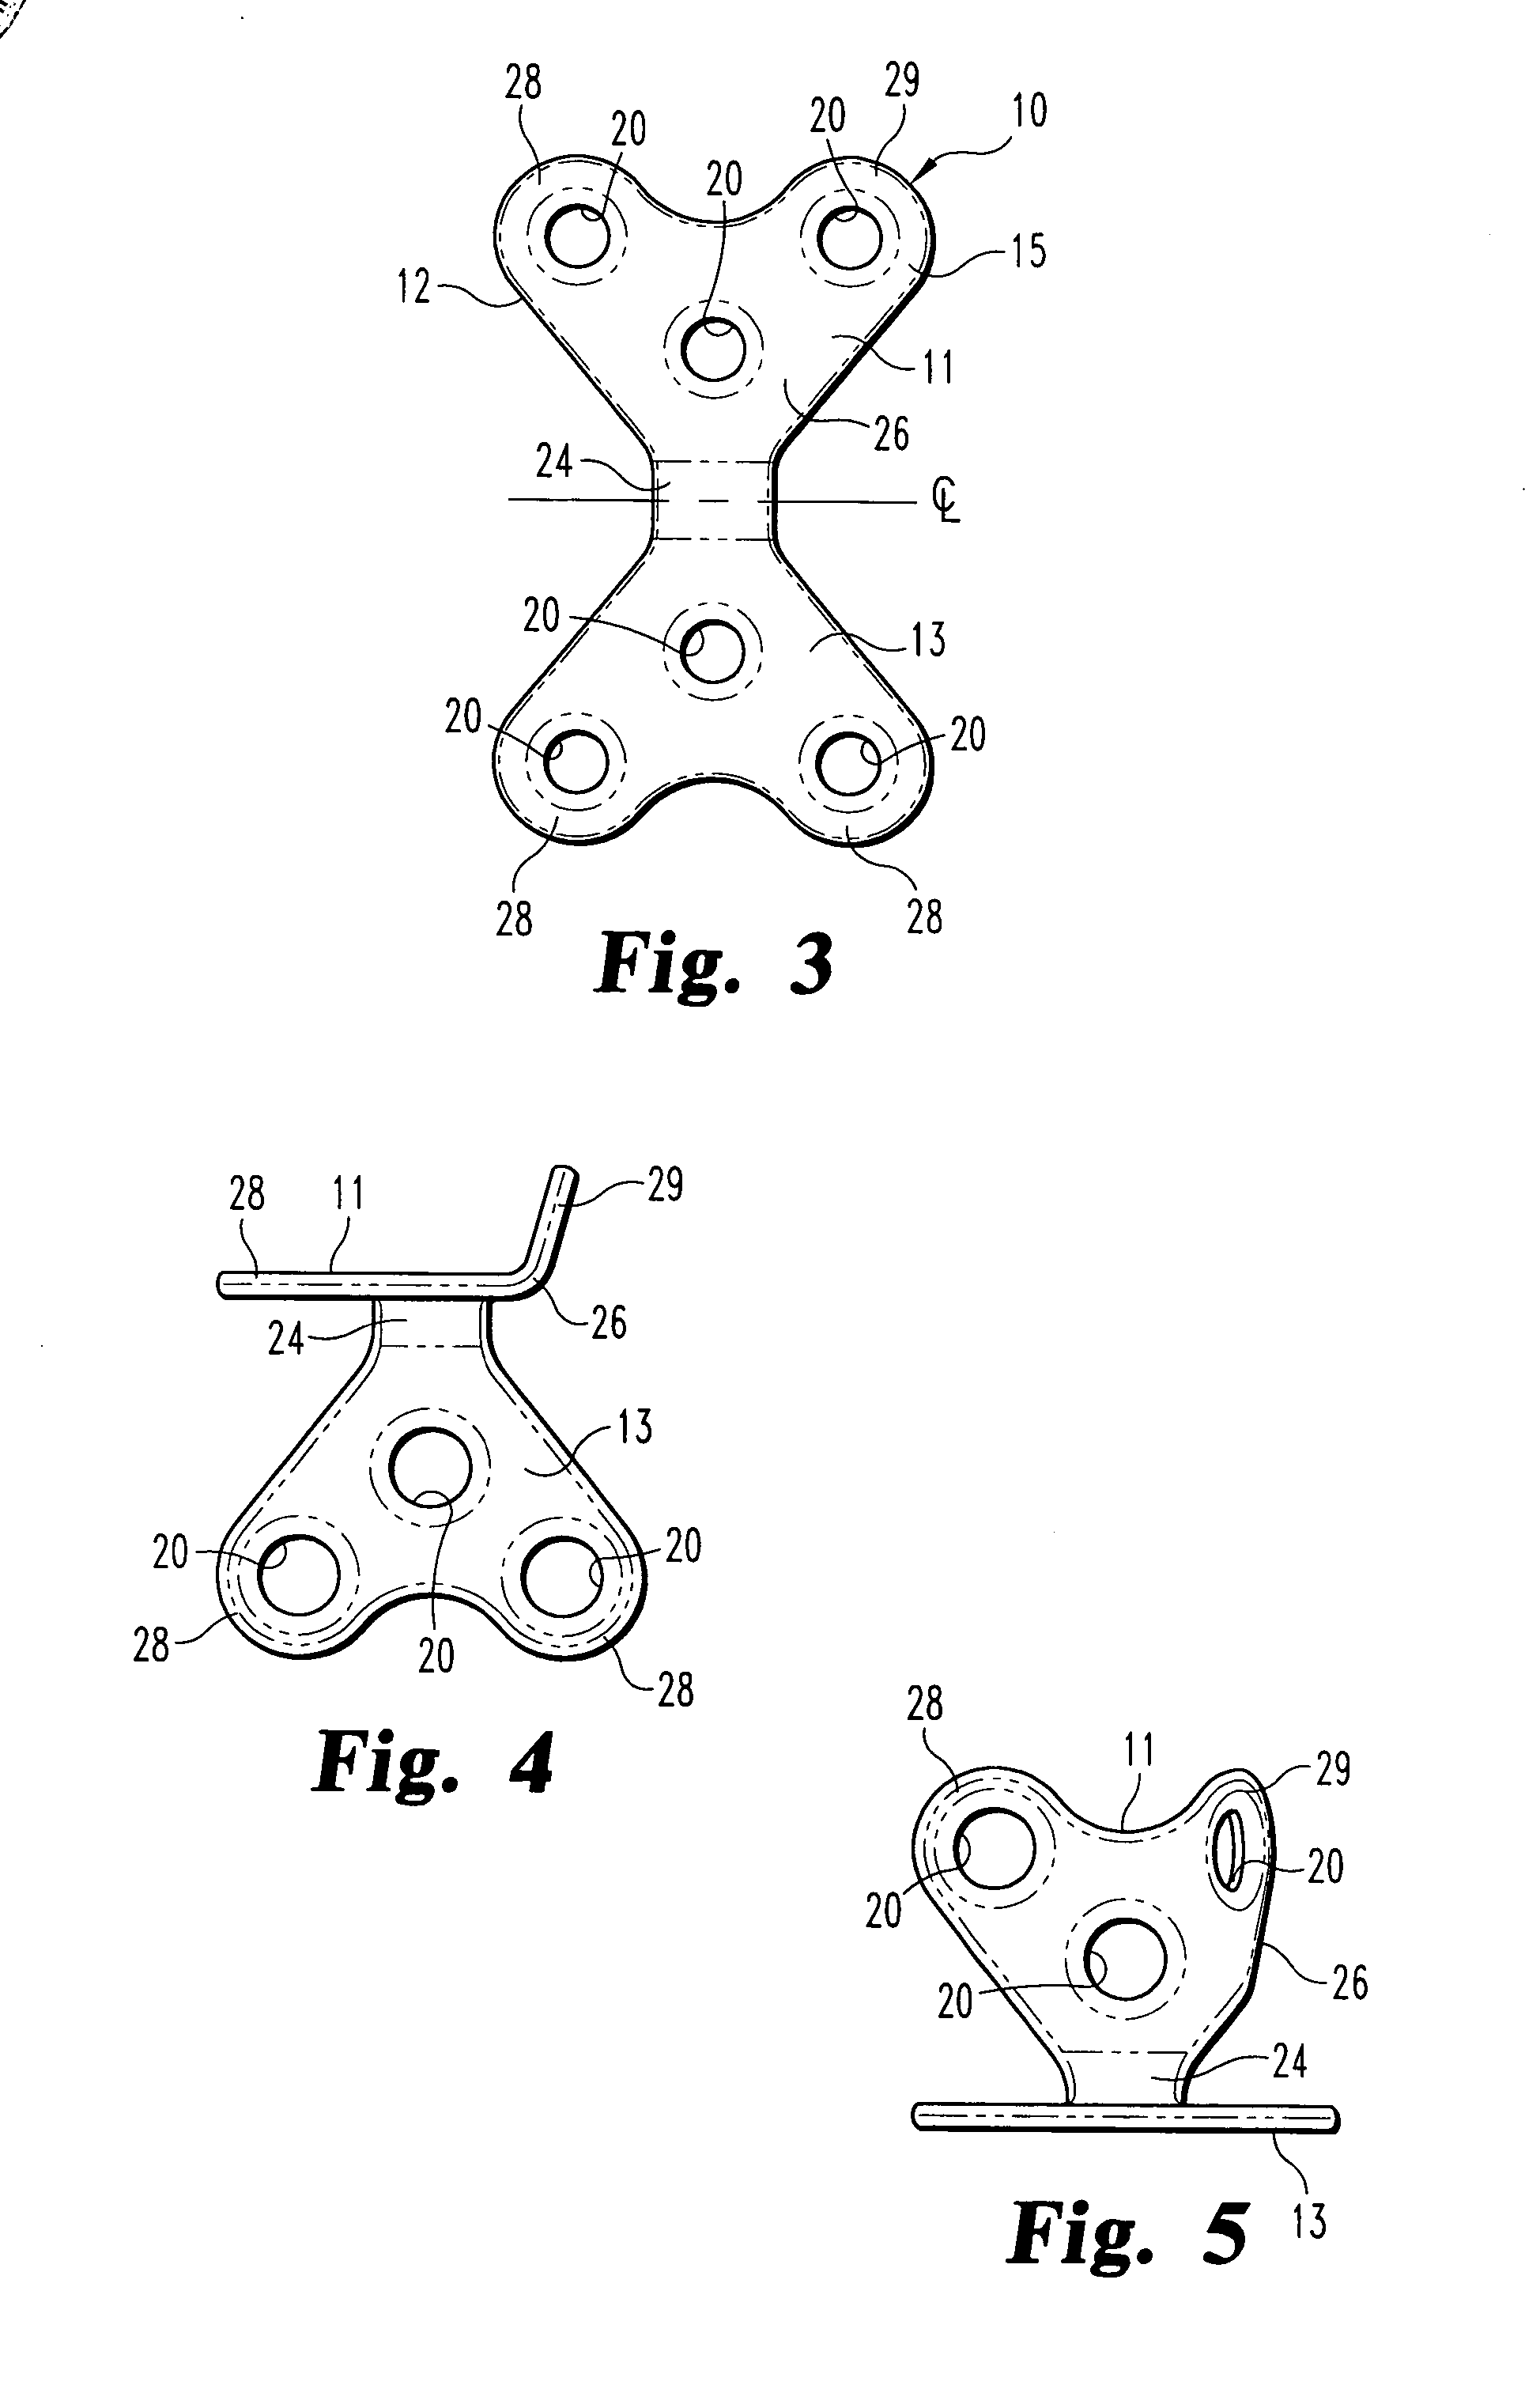 Fixation device for the talus